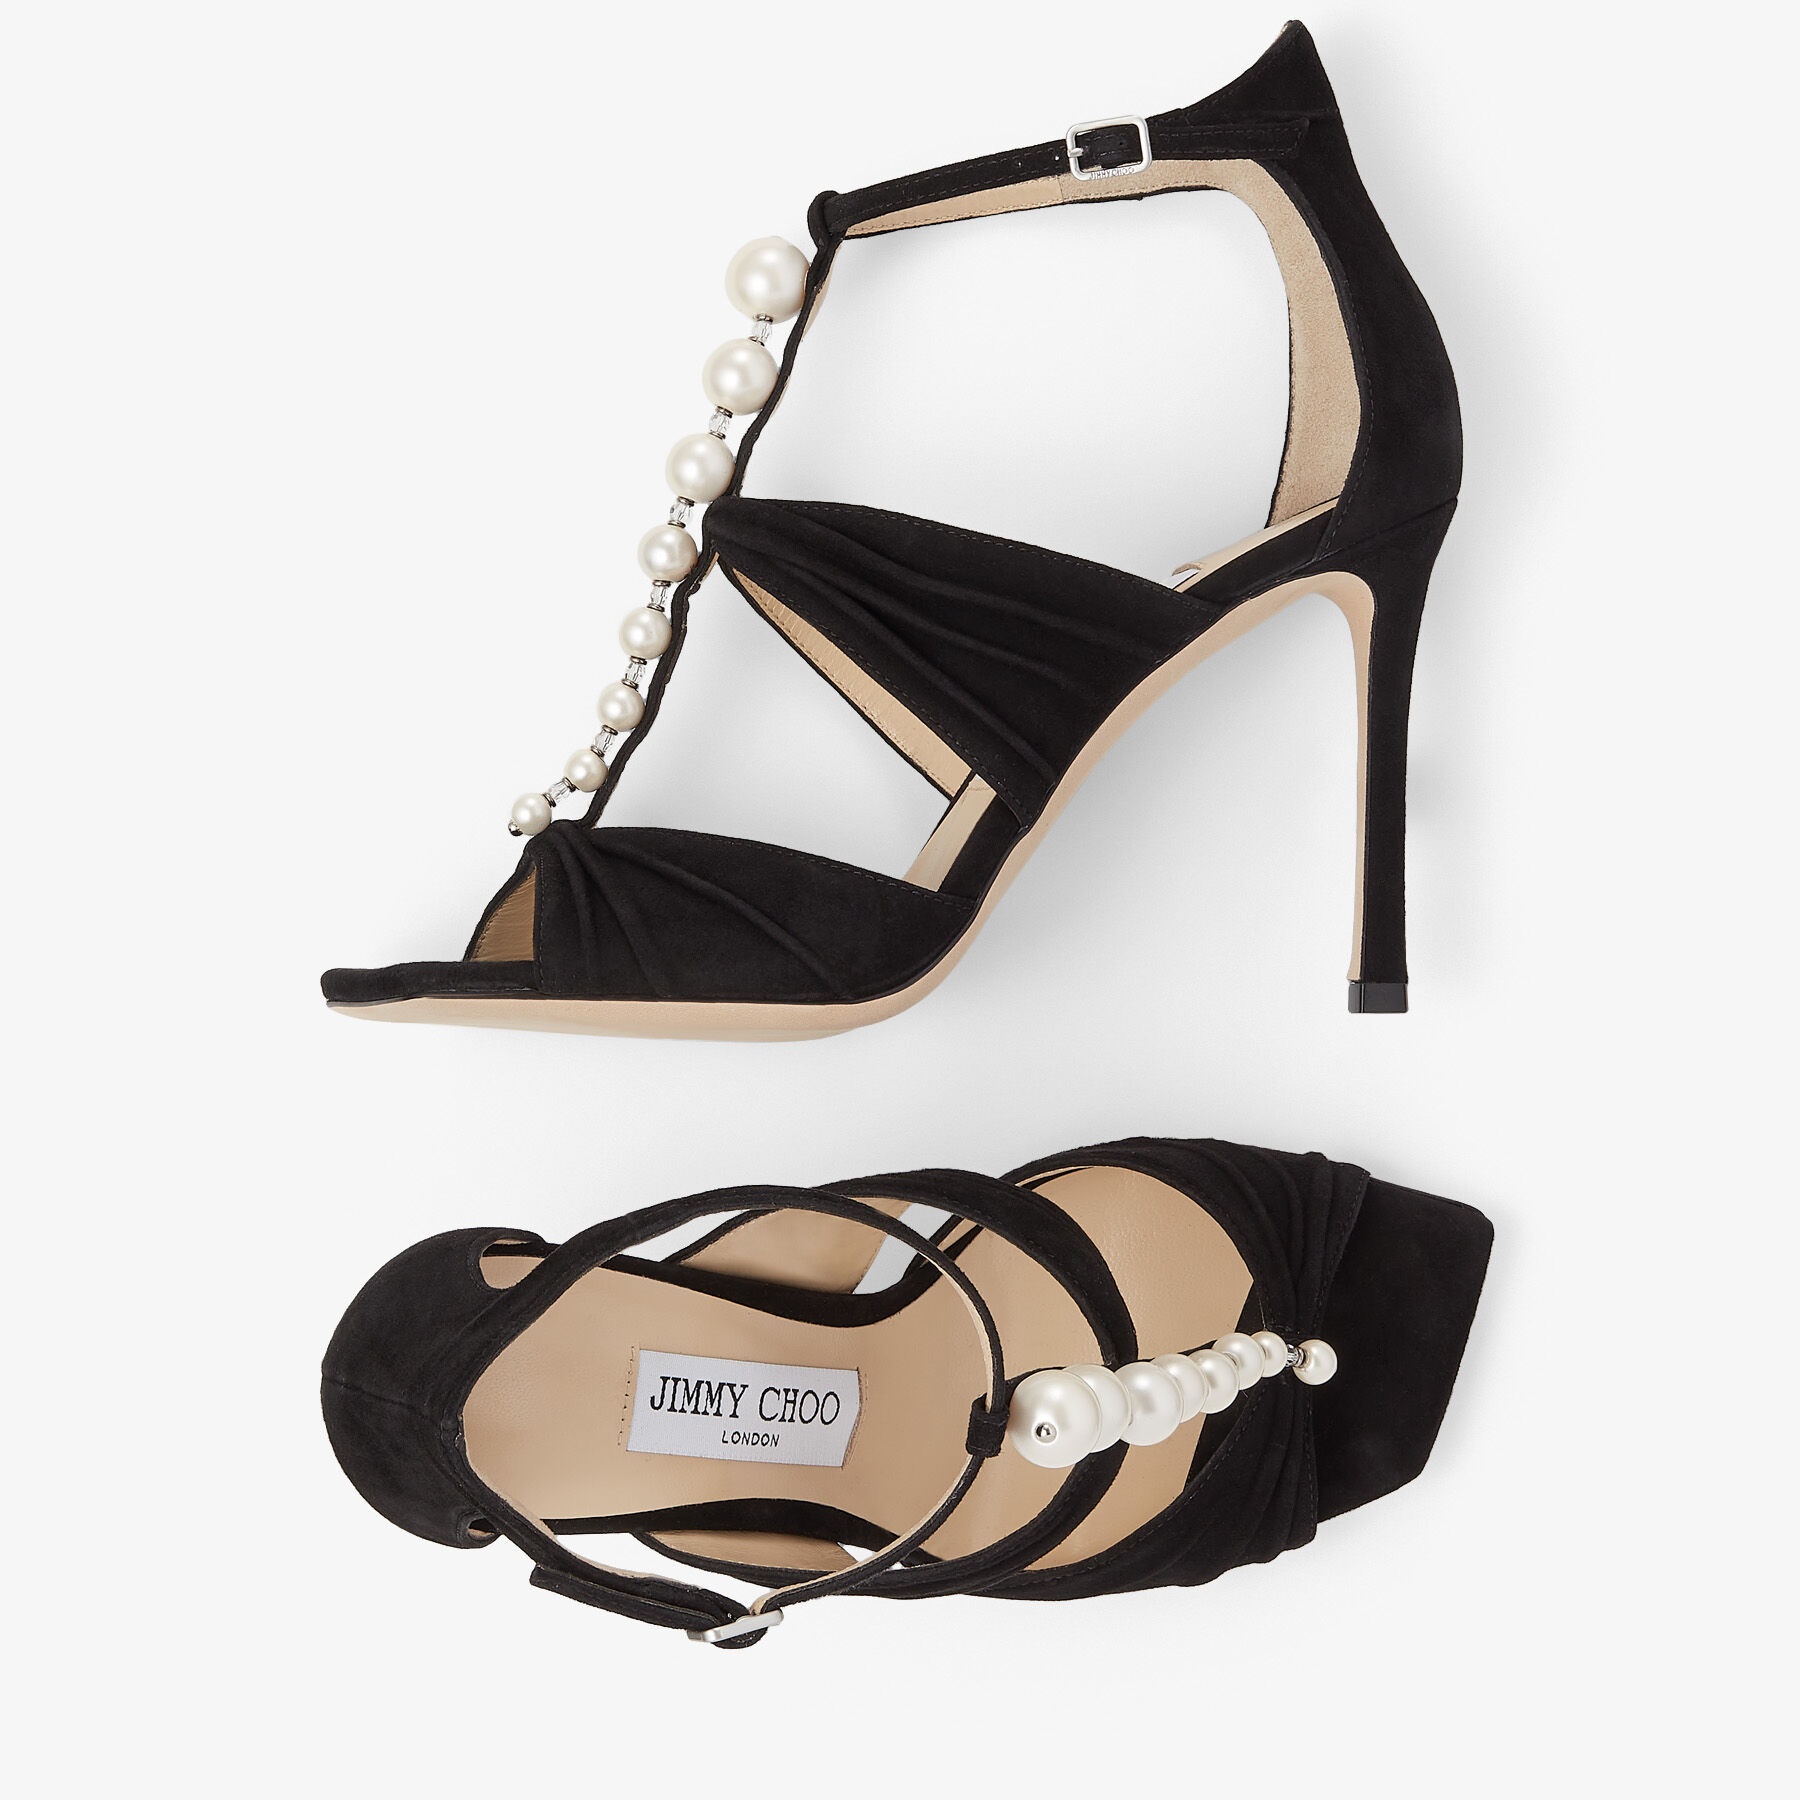 Aura 95
Black Suede Sandals with Pearls and Crystals - 5